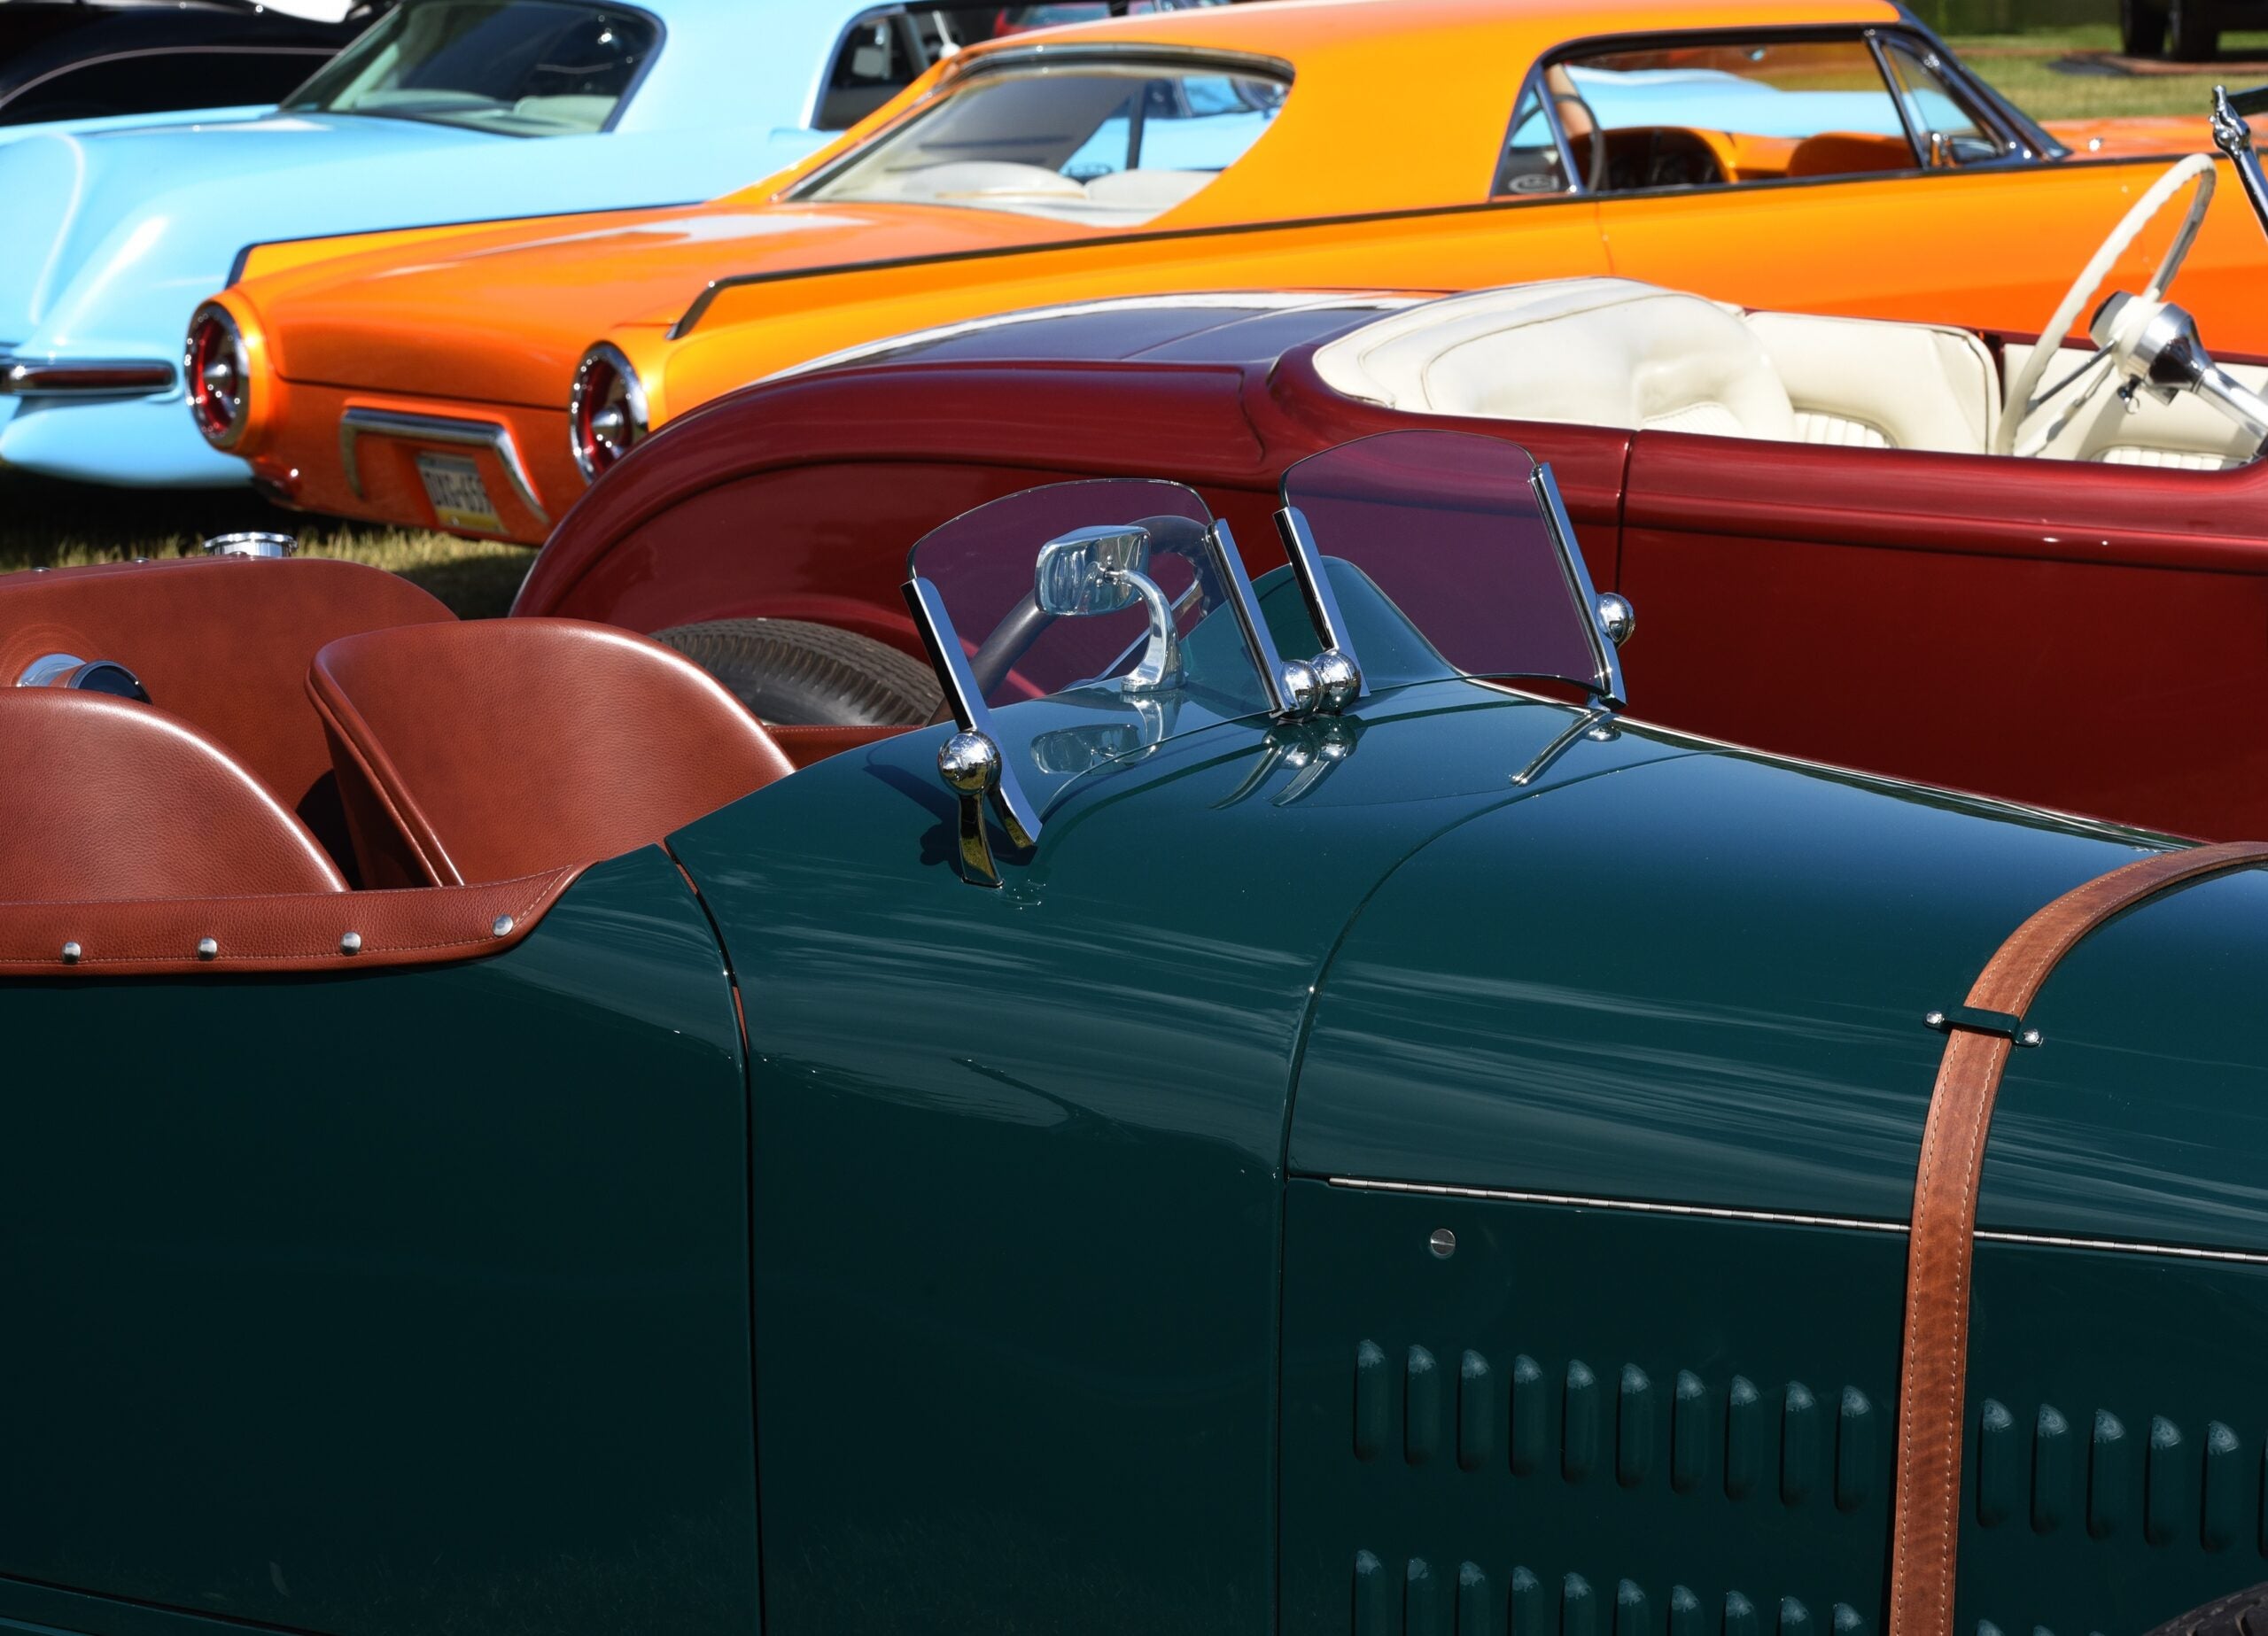 These New England car shows are among the 10 best in the U.S